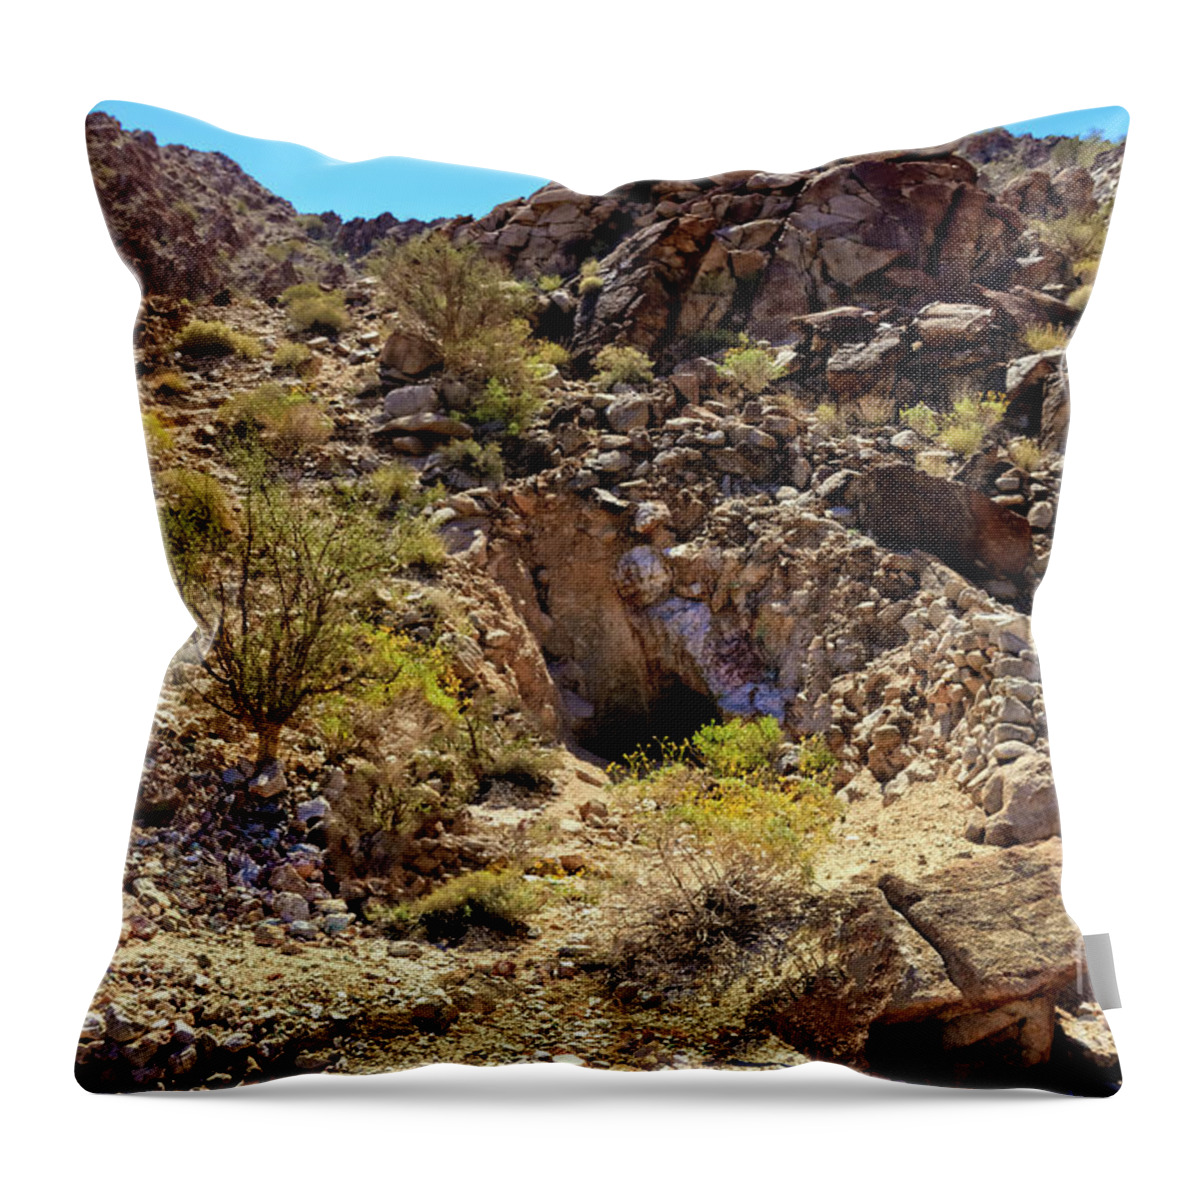 Shafted Mine Throw Pillow featuring the photograph The Shafted Mine by Robert Bales